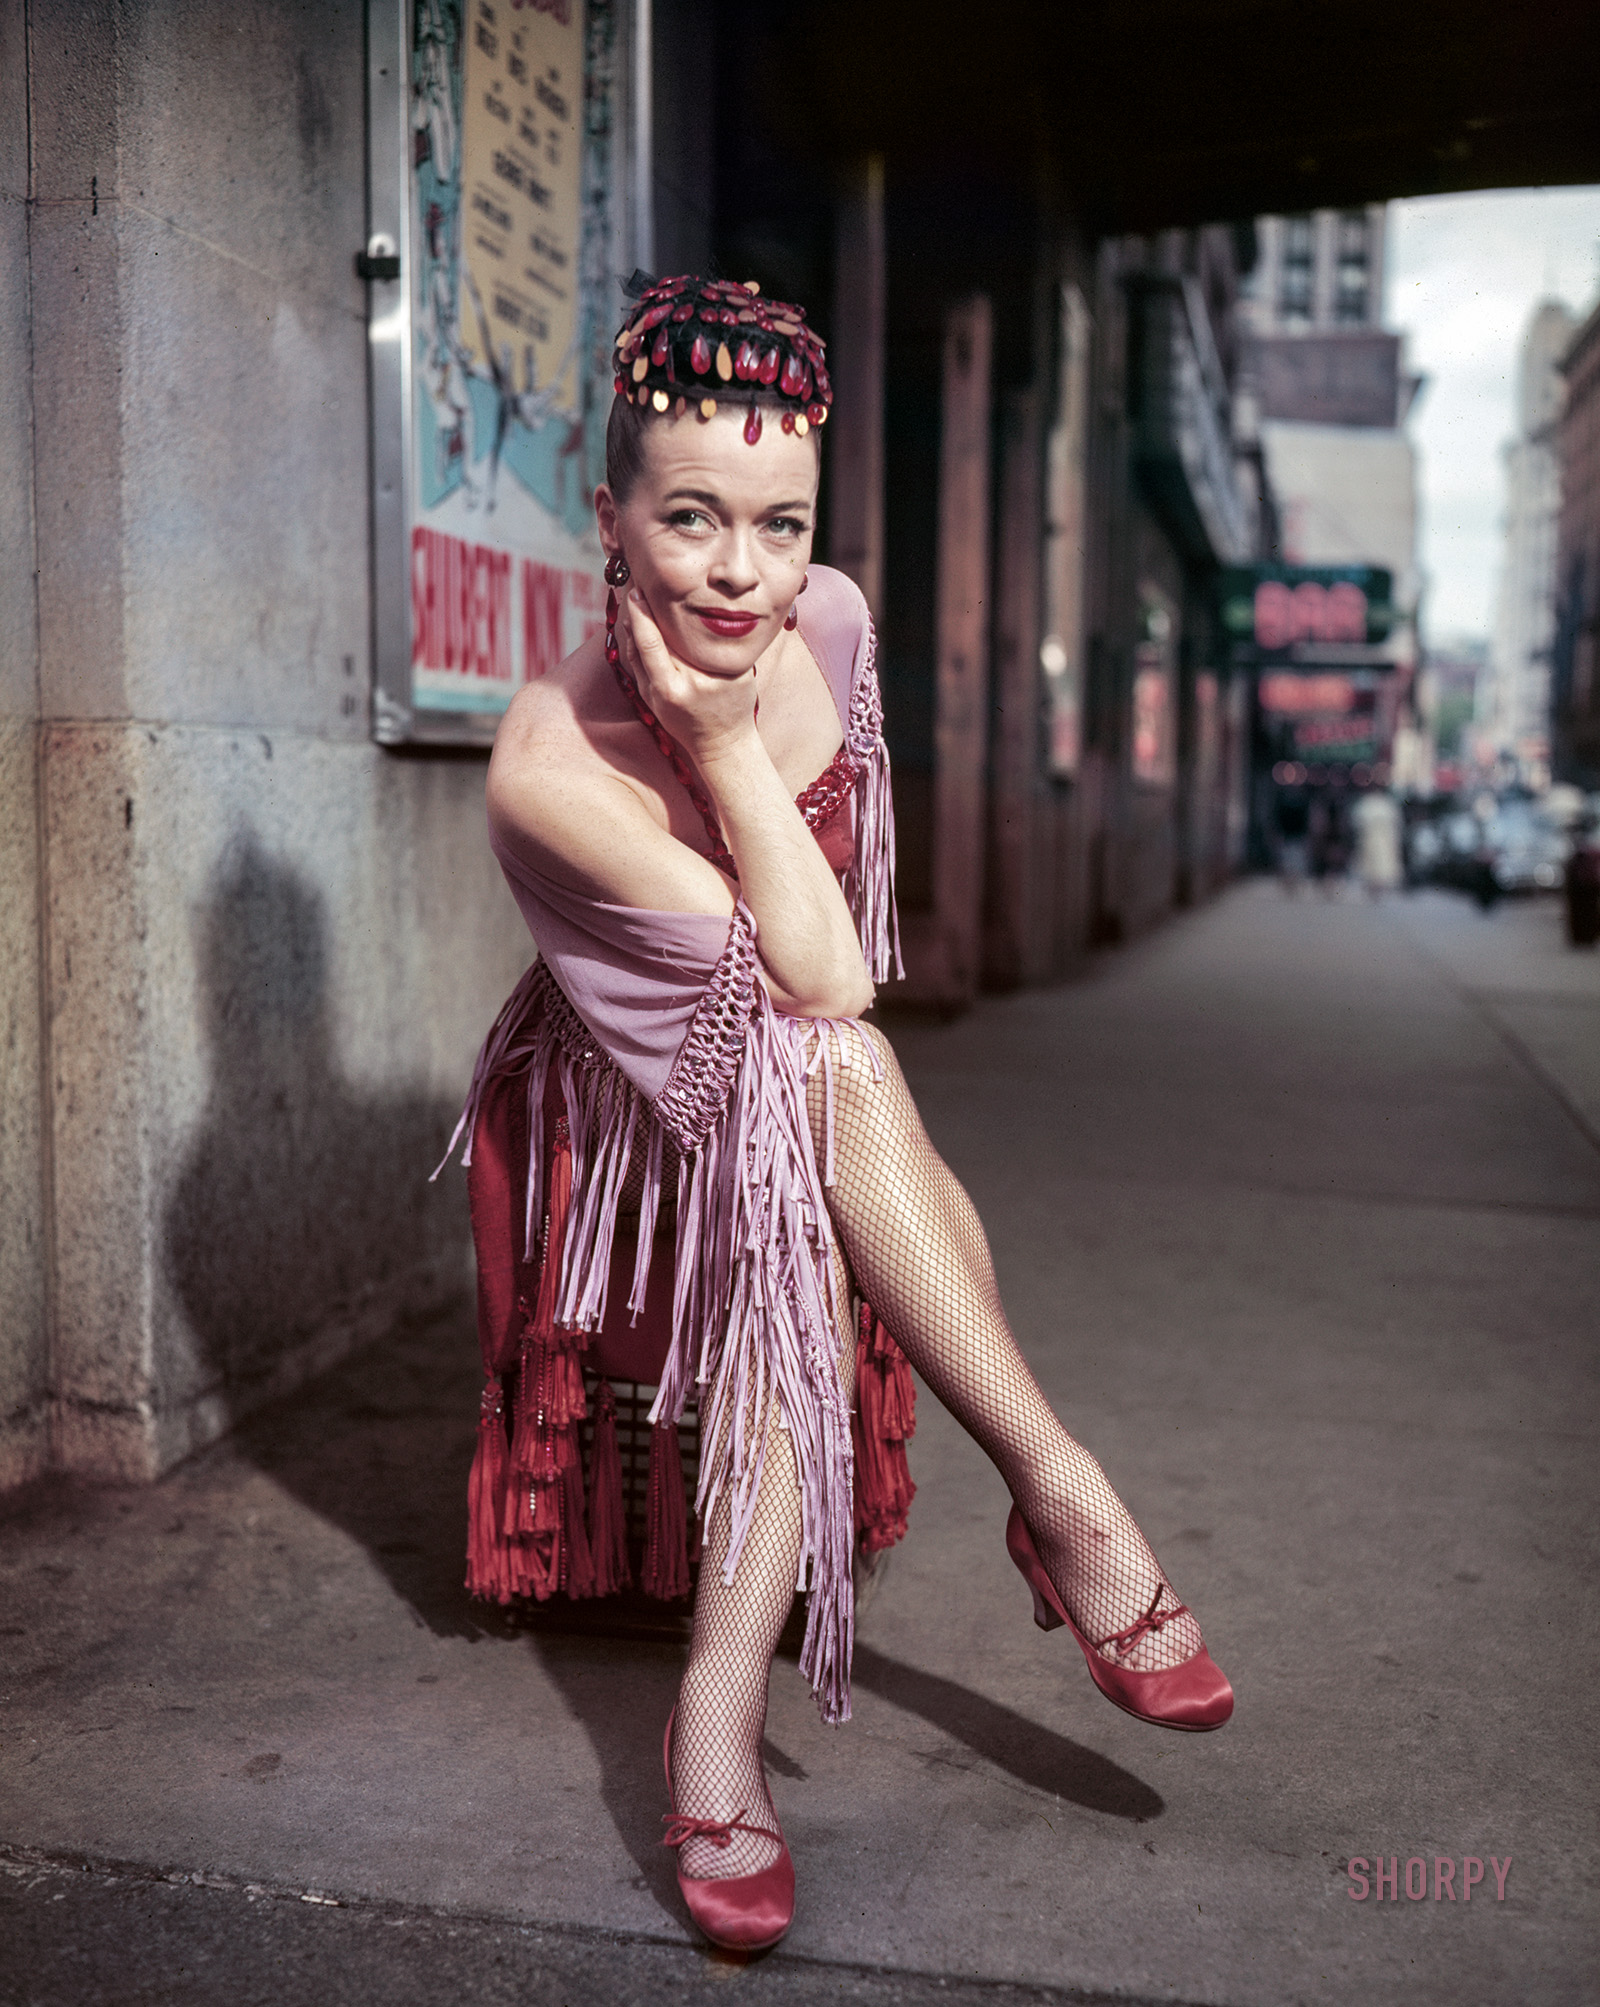 New York, 1953. "Actress Joan McCracken [1917-1961] in costume for the musical Me & Juliet." Color transparency by Phillip Harrington for Look magazine. View full size.